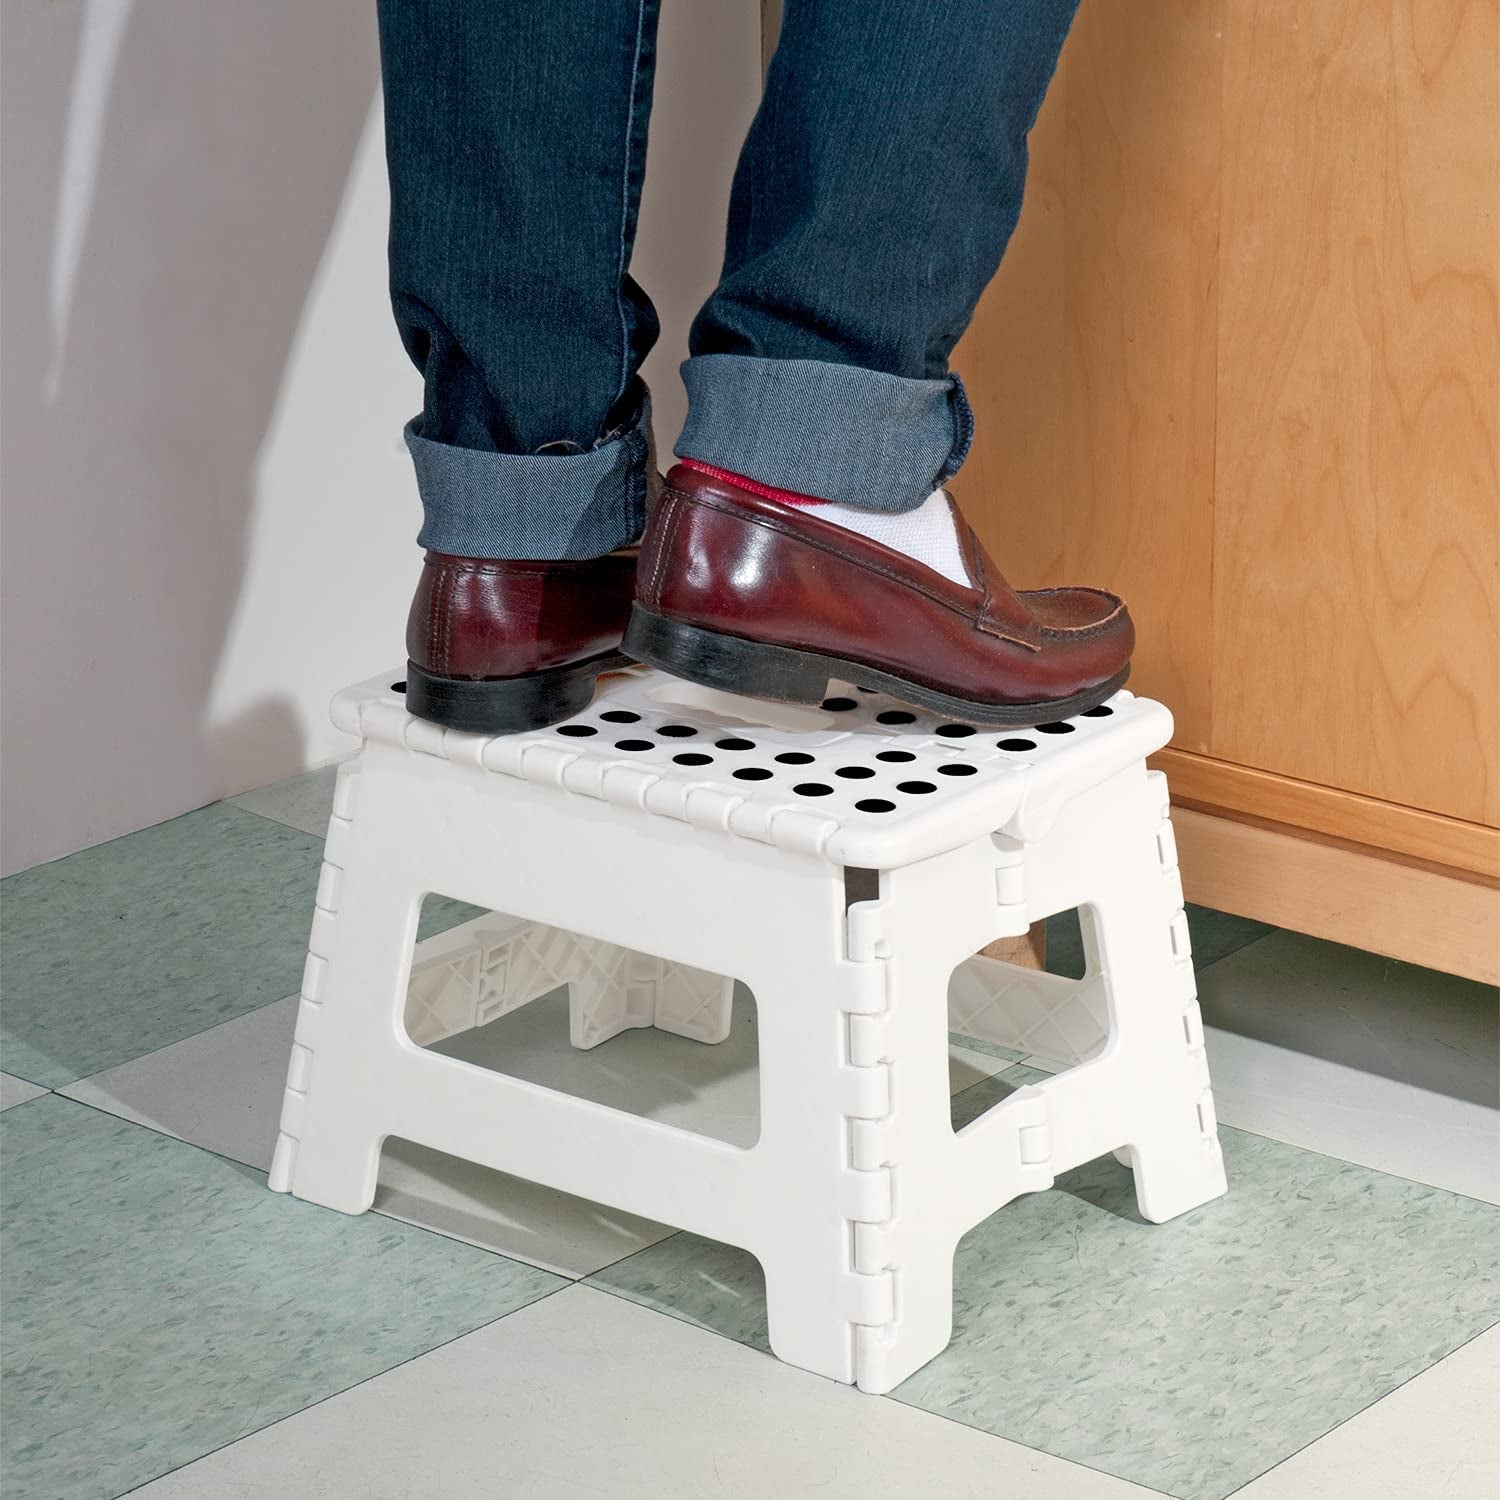 9-Inch Lightweight Folding Step Stool with Anti-Skid & Non-Slip Design, Collapsible, 300 Lb Capacity, White